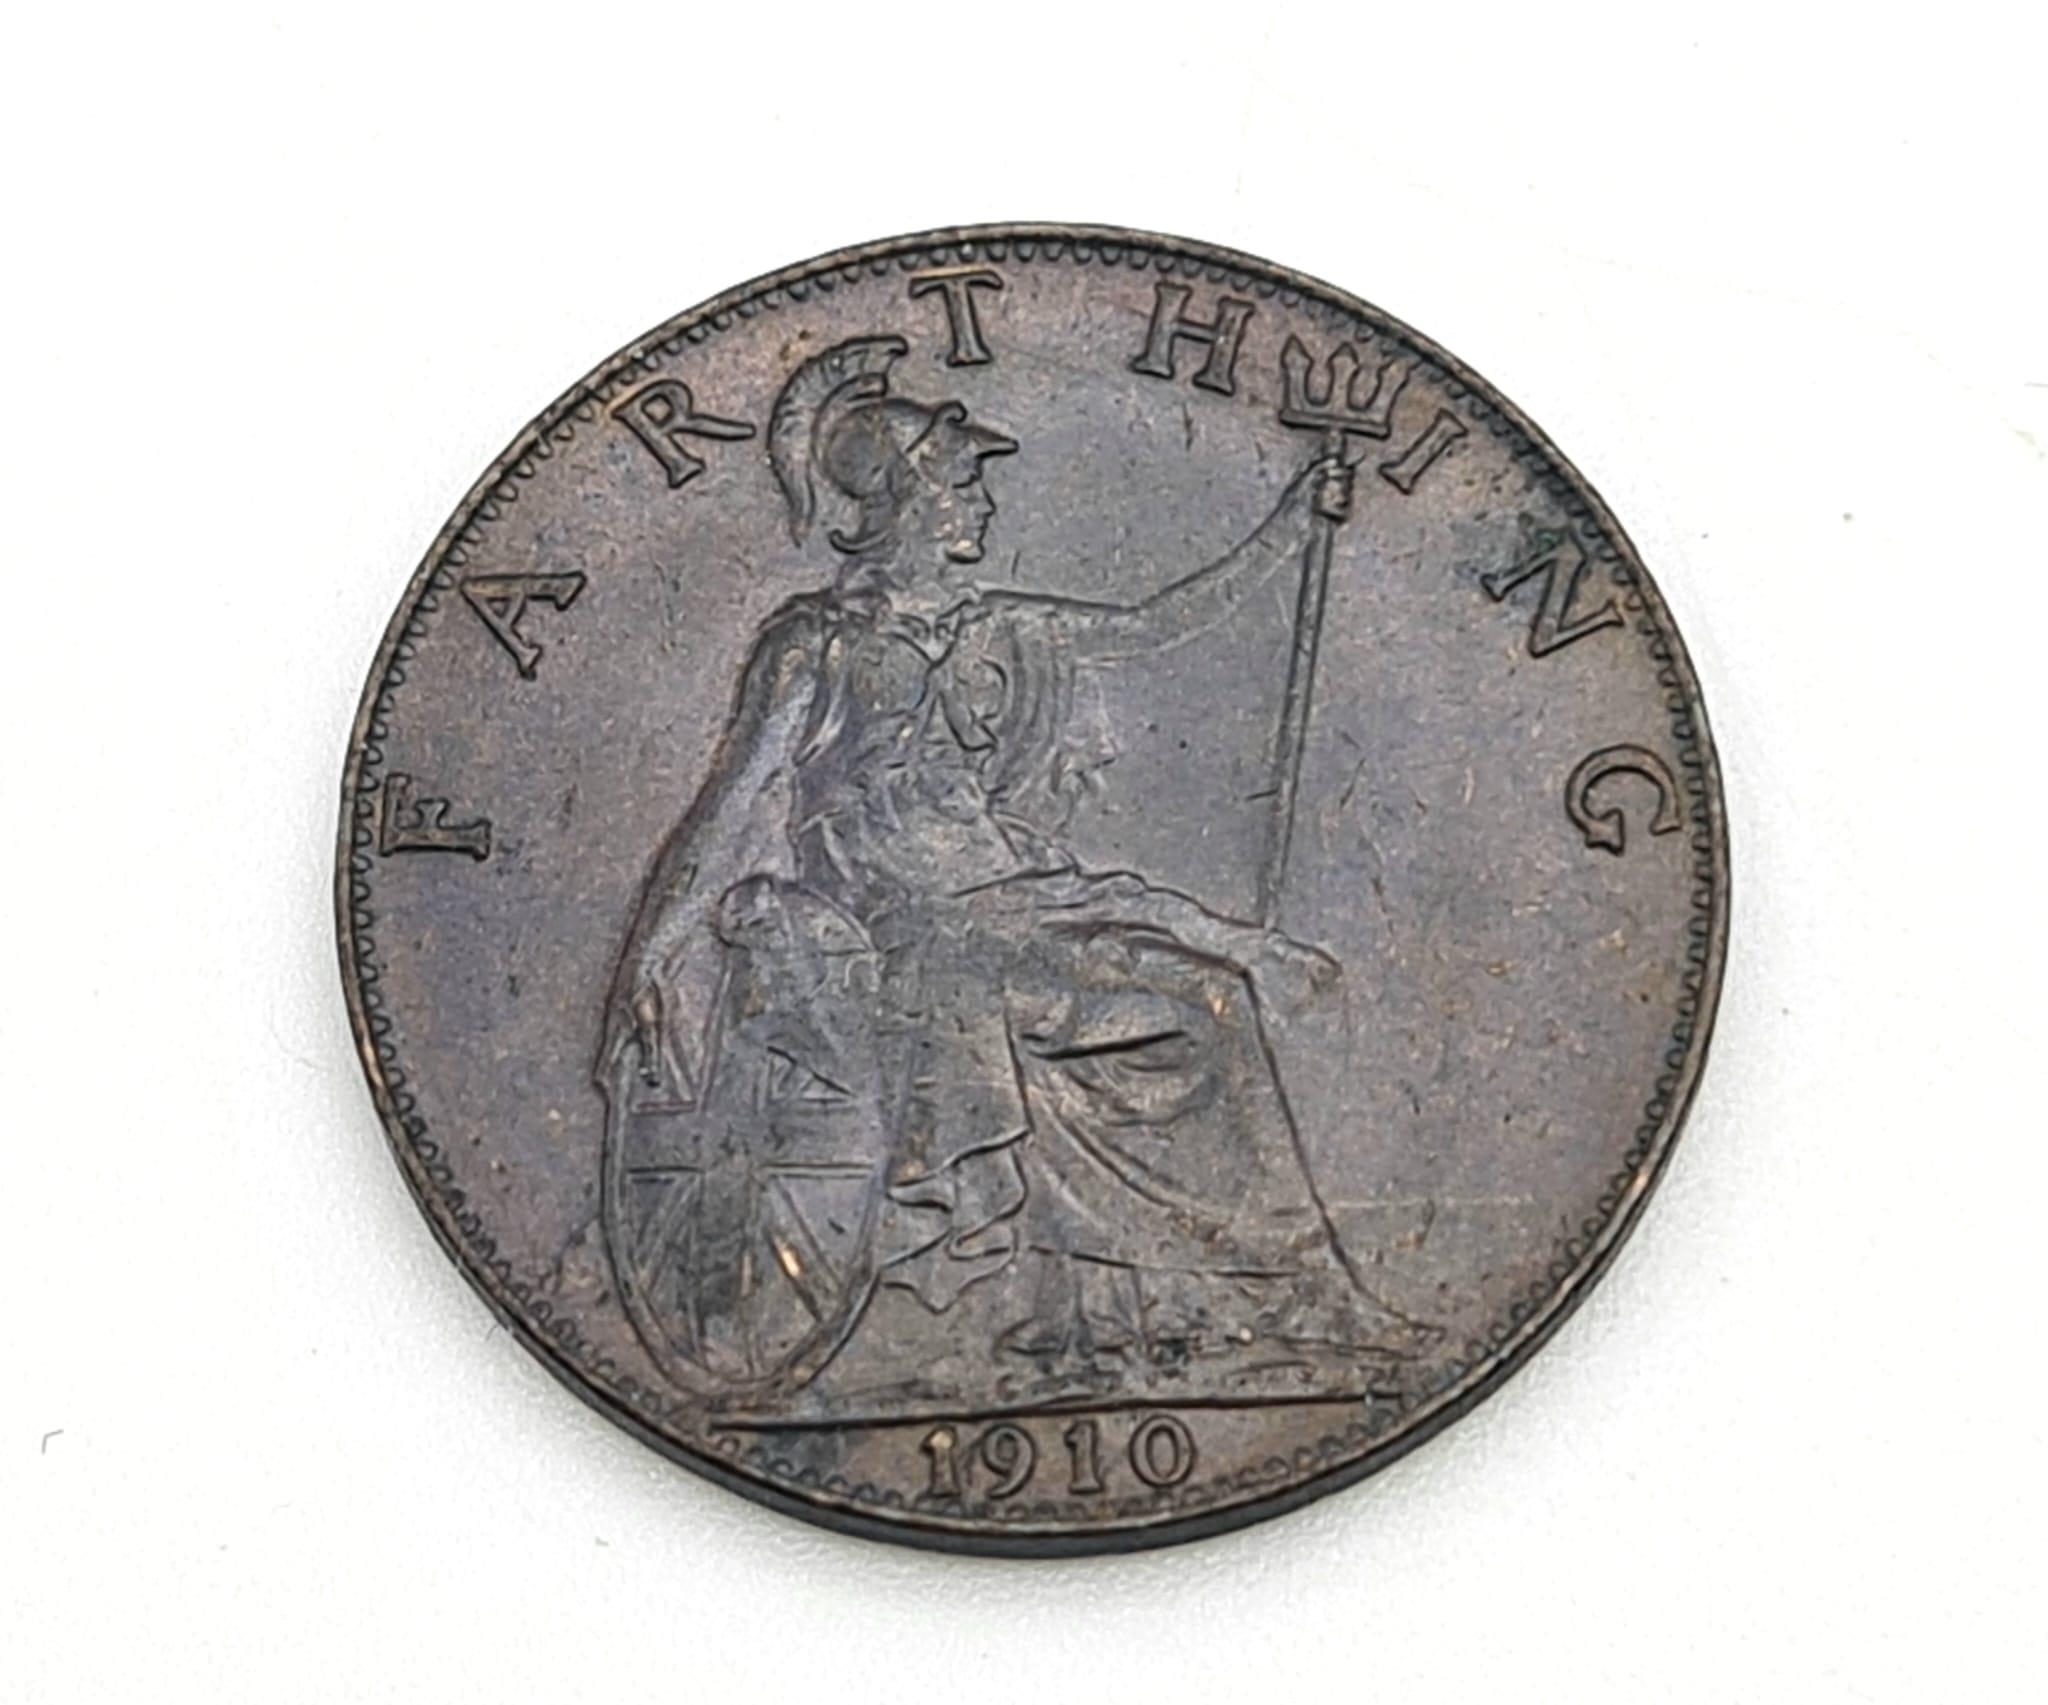 A 1910 Bronze Farthing Coin. Good extremely fine. Obverse - Features the uncrowned portrait of